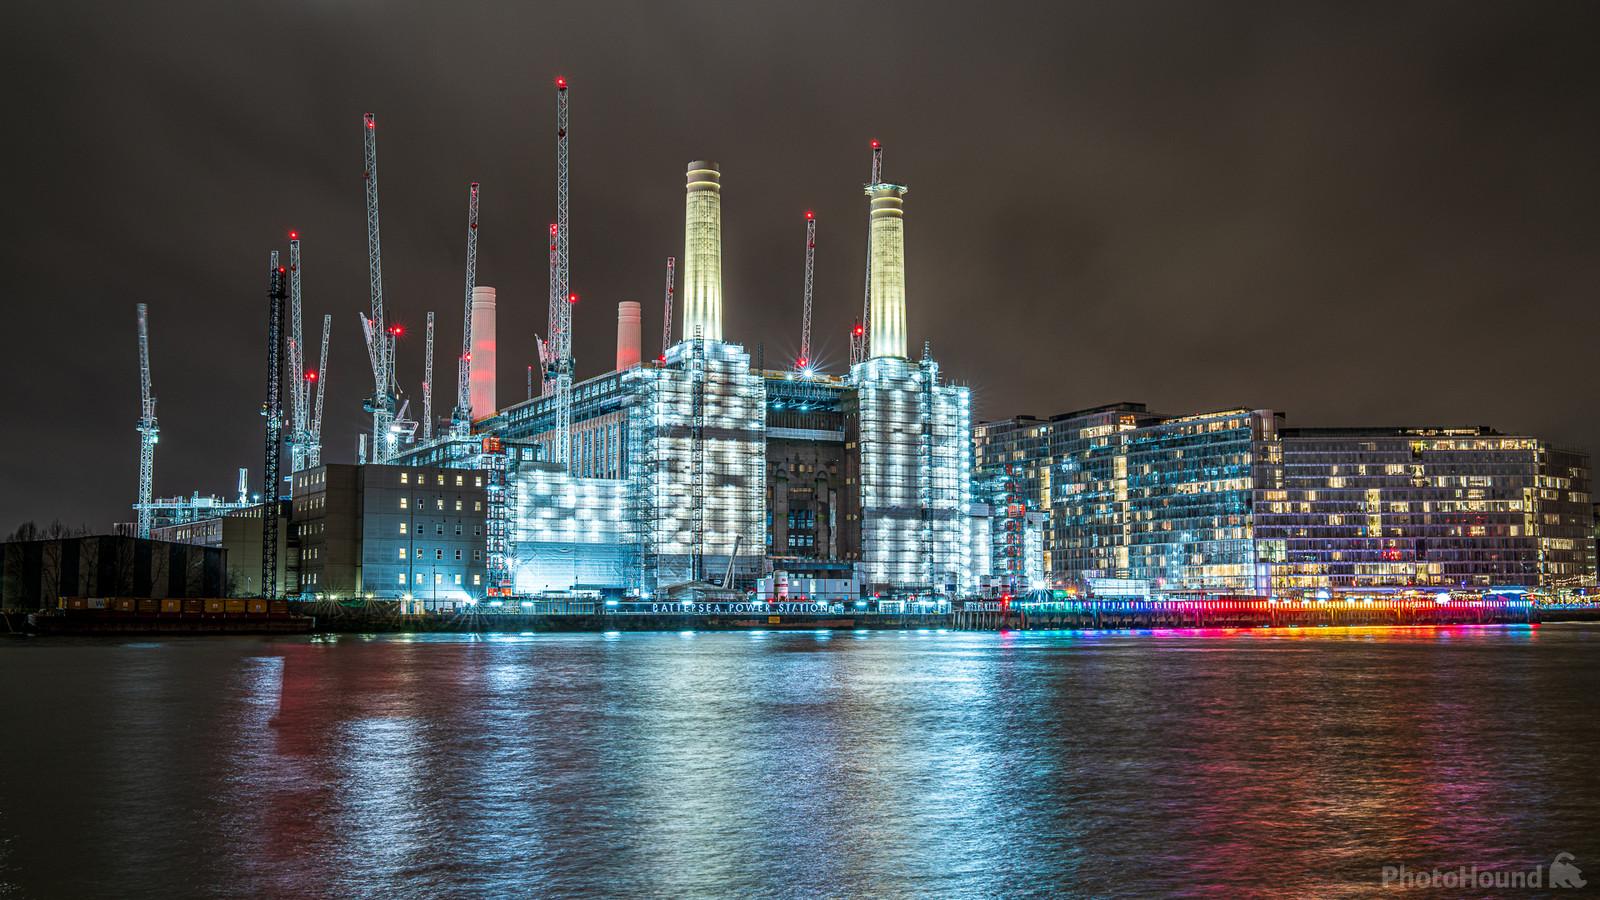 Image of View of Battersea Power Station by James Billings.